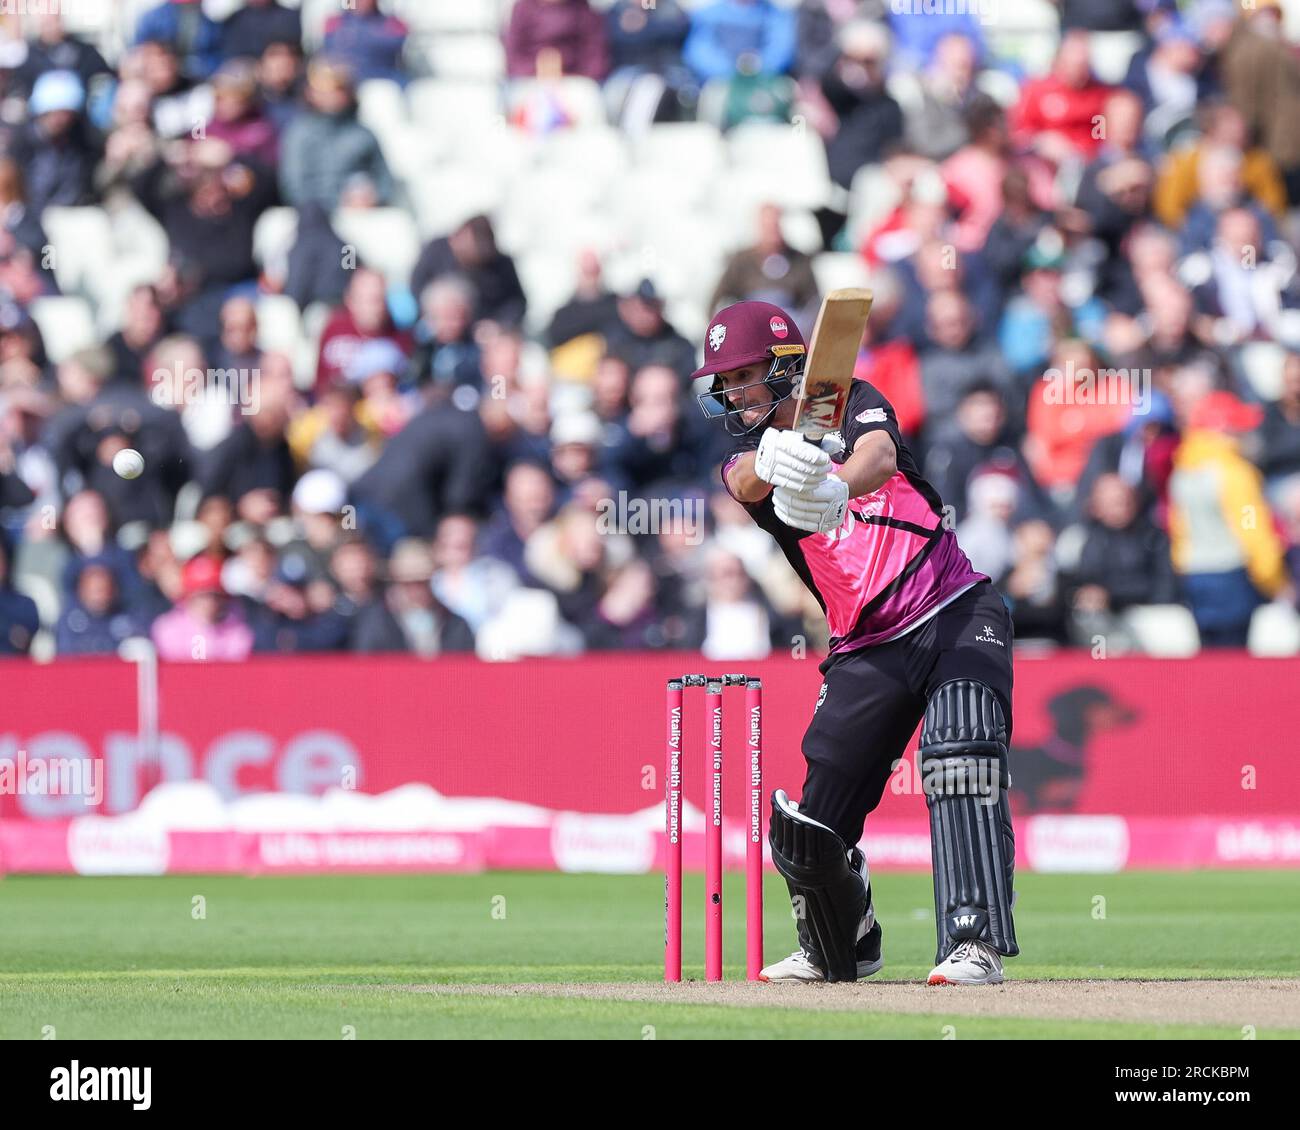 Taken in Birmingham, UK on 15 Jul 2023 at Warwickshire County Cricket Club, Edgbaston.  Pictured is Somerset’s Sean Dickson in action during the 2023 Vitality Blast Semi Final between Somerset & Surrey  Image is for editorial use only - credit to Stu Leggett via Alamy Live News Stock Photo